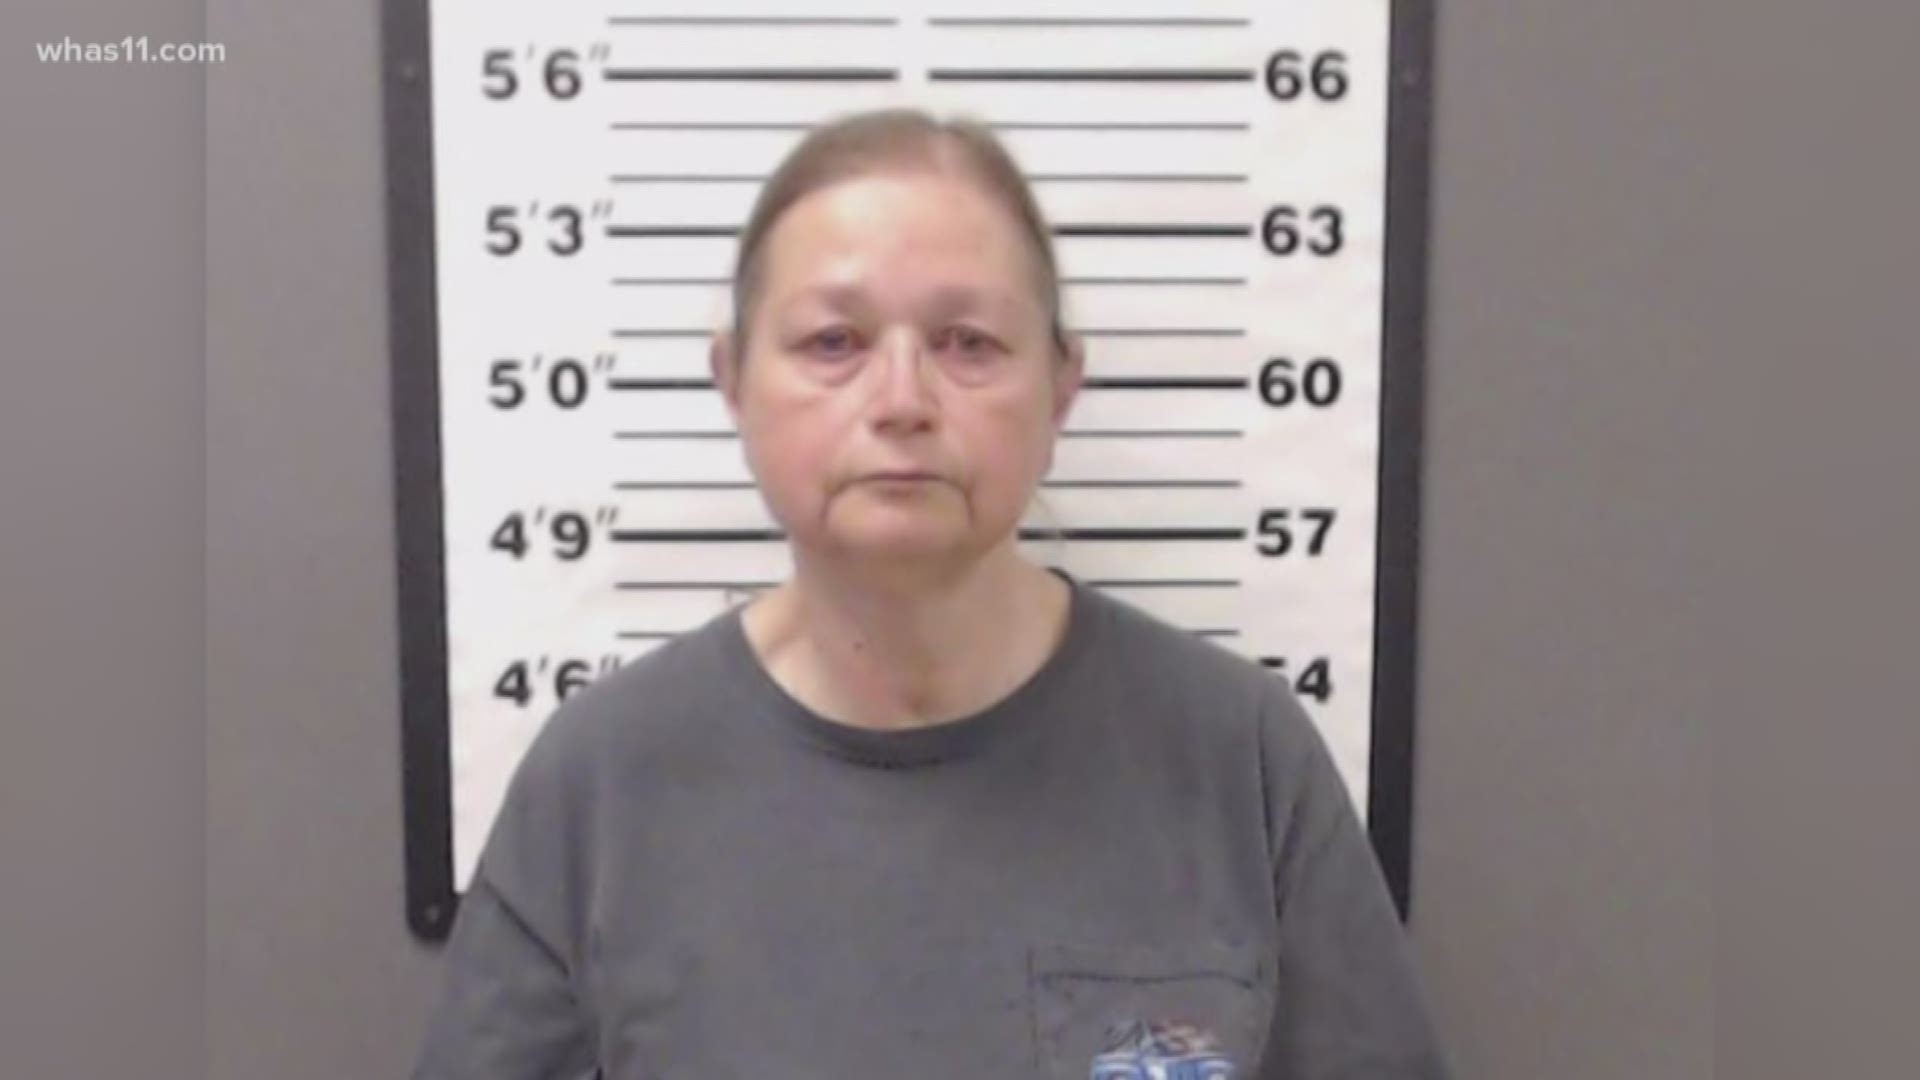 The Jefferson County, Indiana, woman arrested after investigators found dozens of animals in poor condition at her home made her first appearance in court Wednesday.